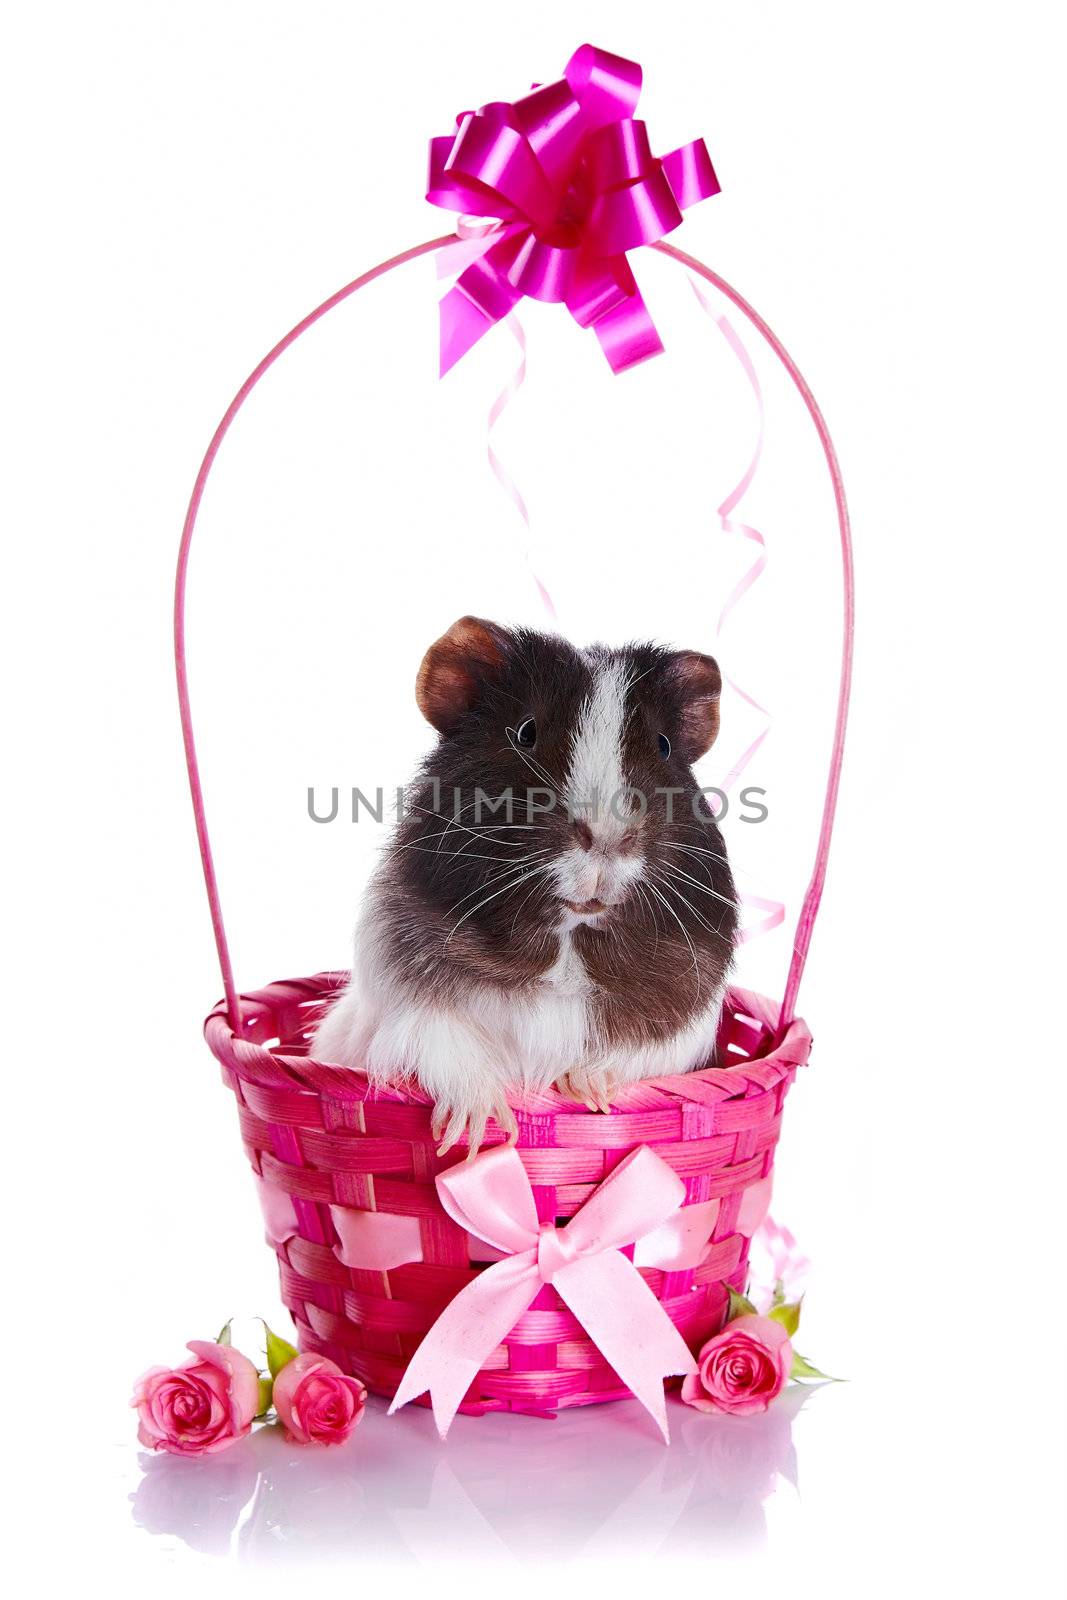 Guinea pig in a basket. Guinea pig and roses. Guinea pig and flowers. Small pet. Live gift.